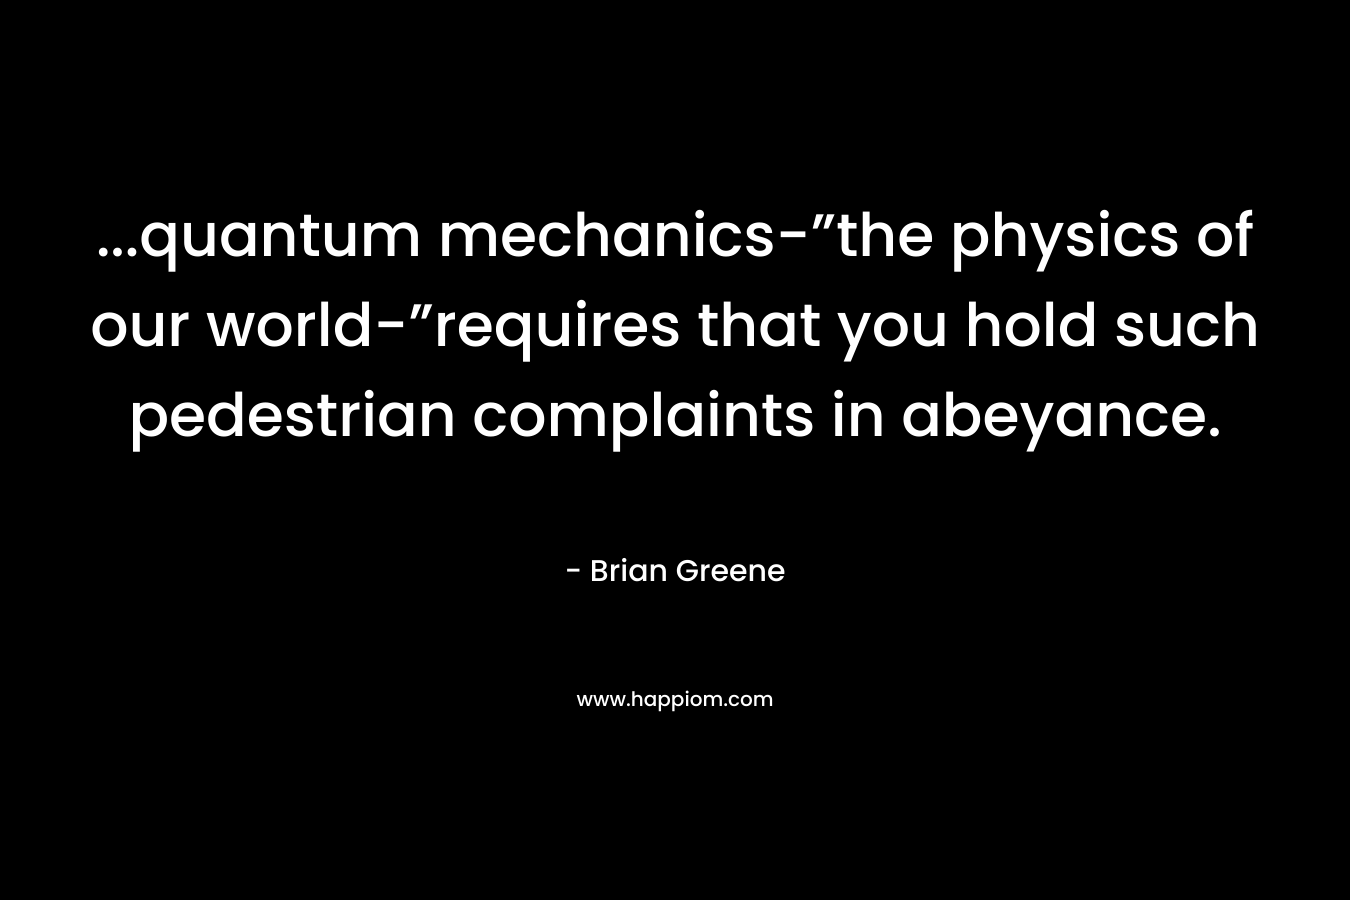 ...quantum mechanics-”the physics of our world-”requires that you hold such pedestrian complaints in abeyance.